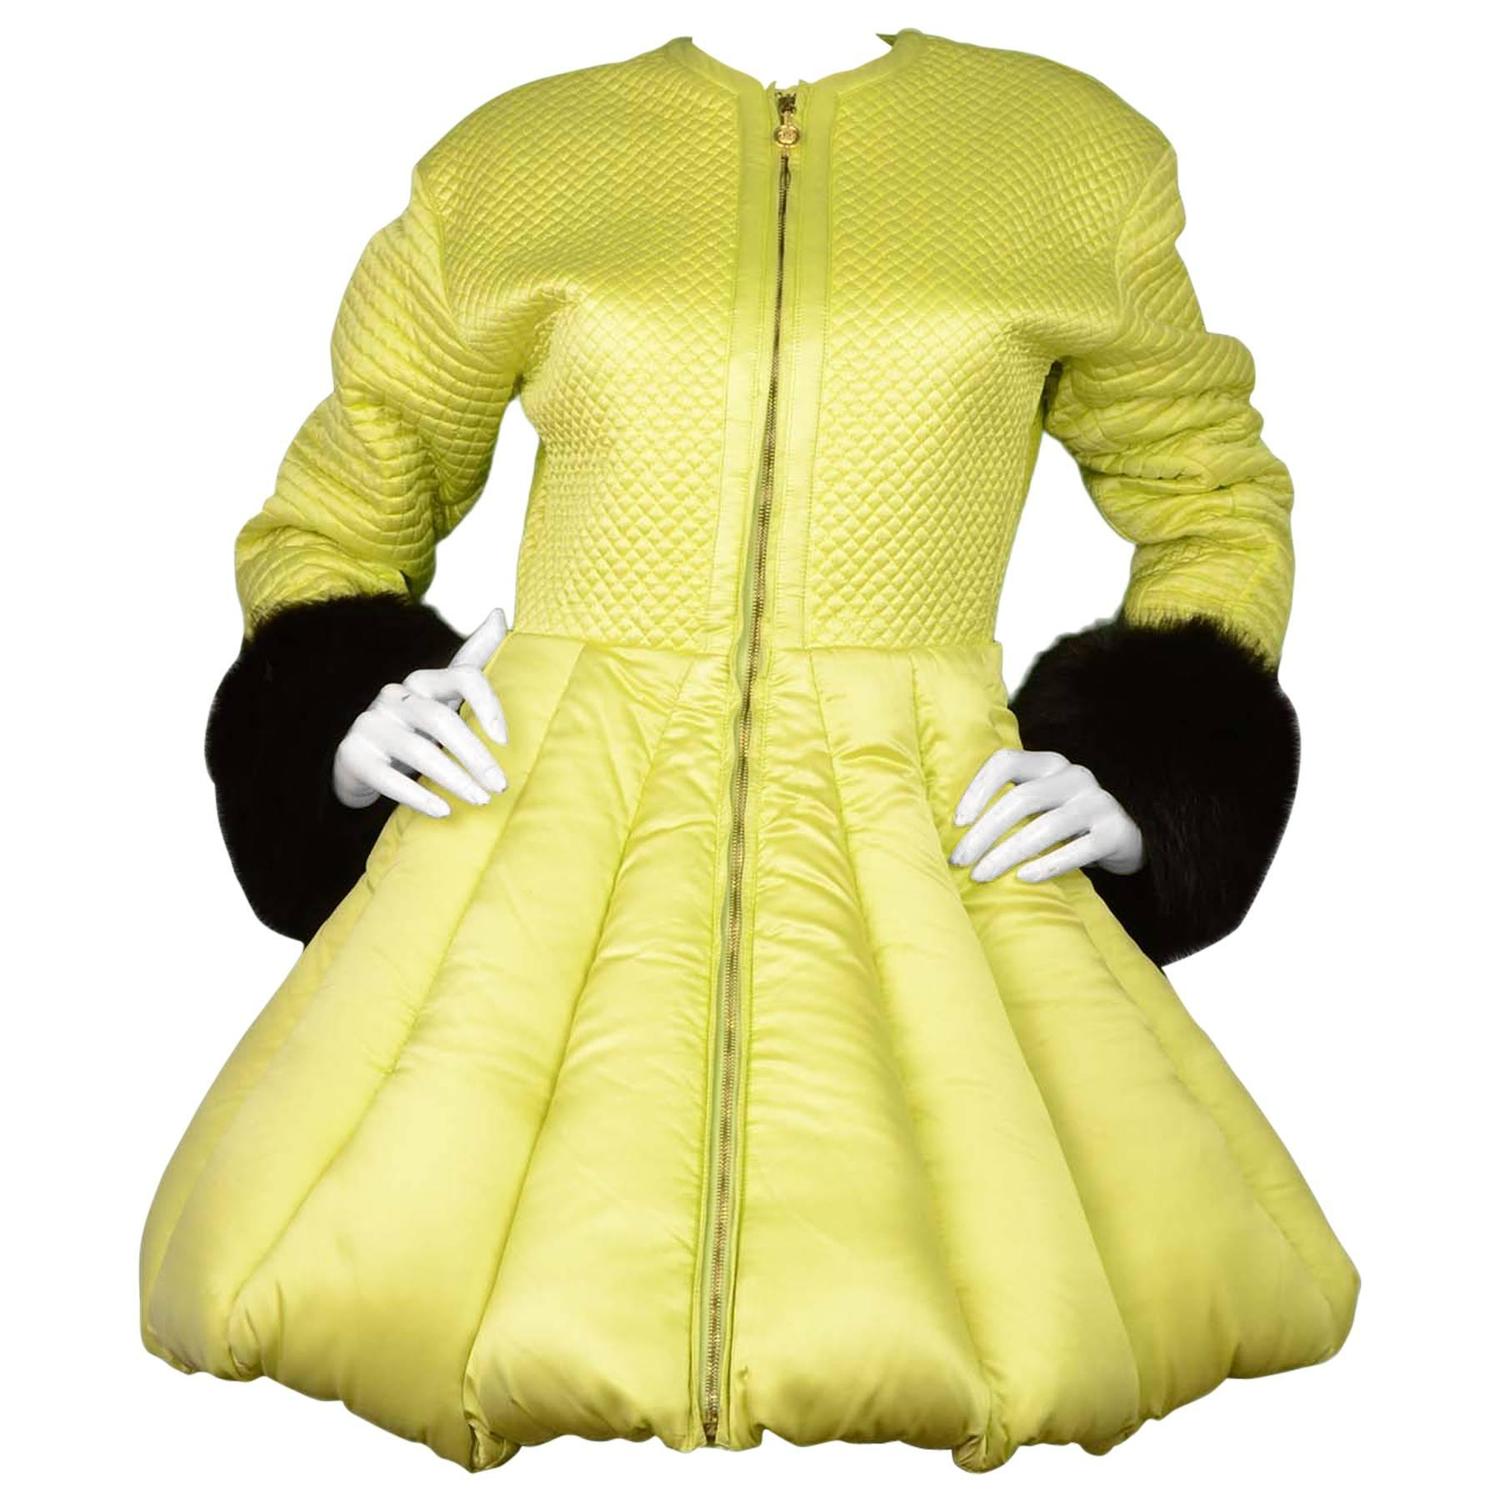 Versace Collector's Lime Green Quilted Puffer Coat sz 42 at 1stdibs